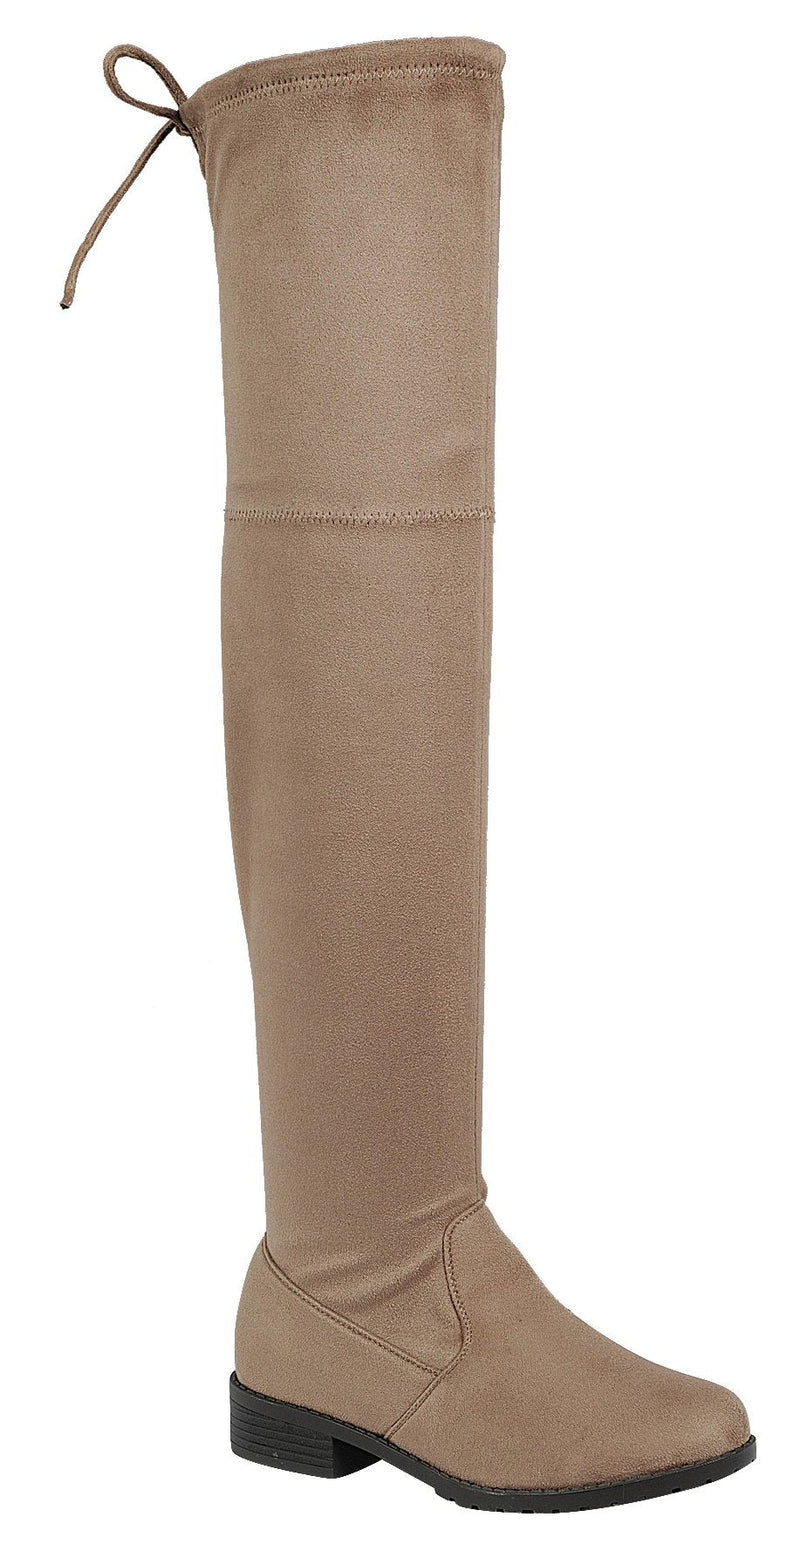 Forever Jalen-H4 Thigh High Over The Knee Boots